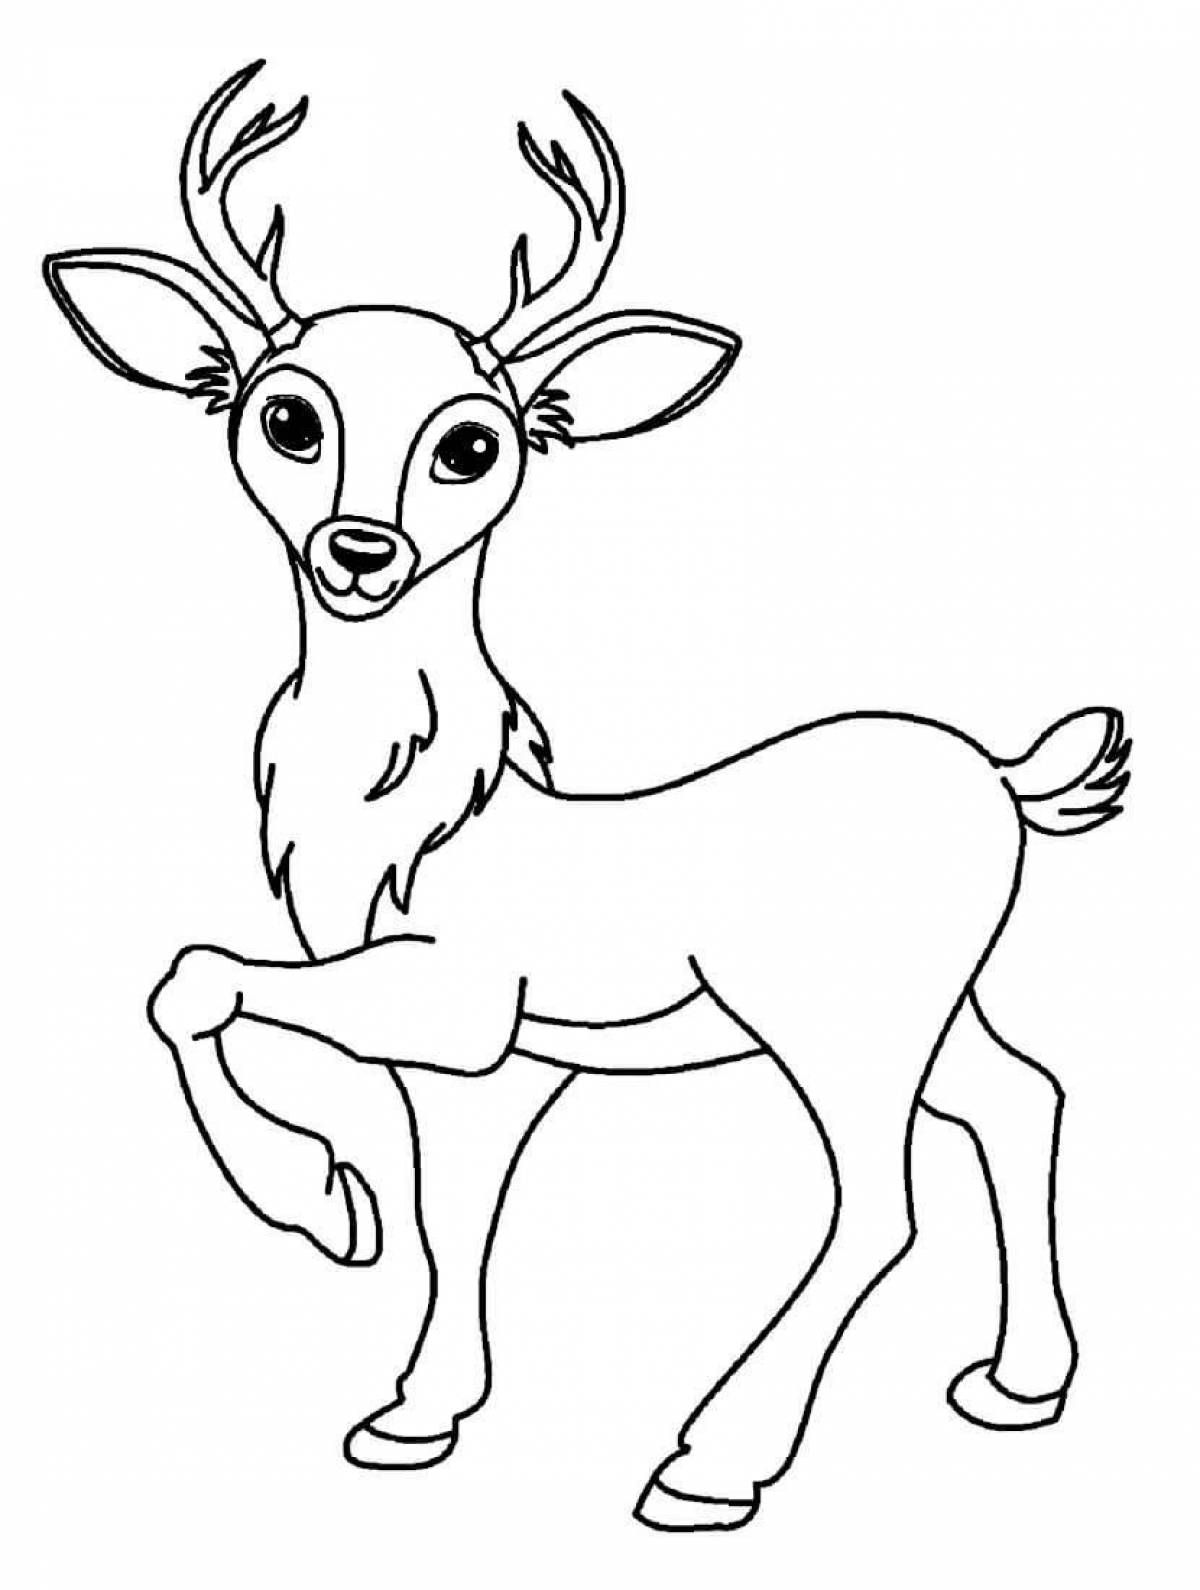 Vibrant deer coloring pages for kids